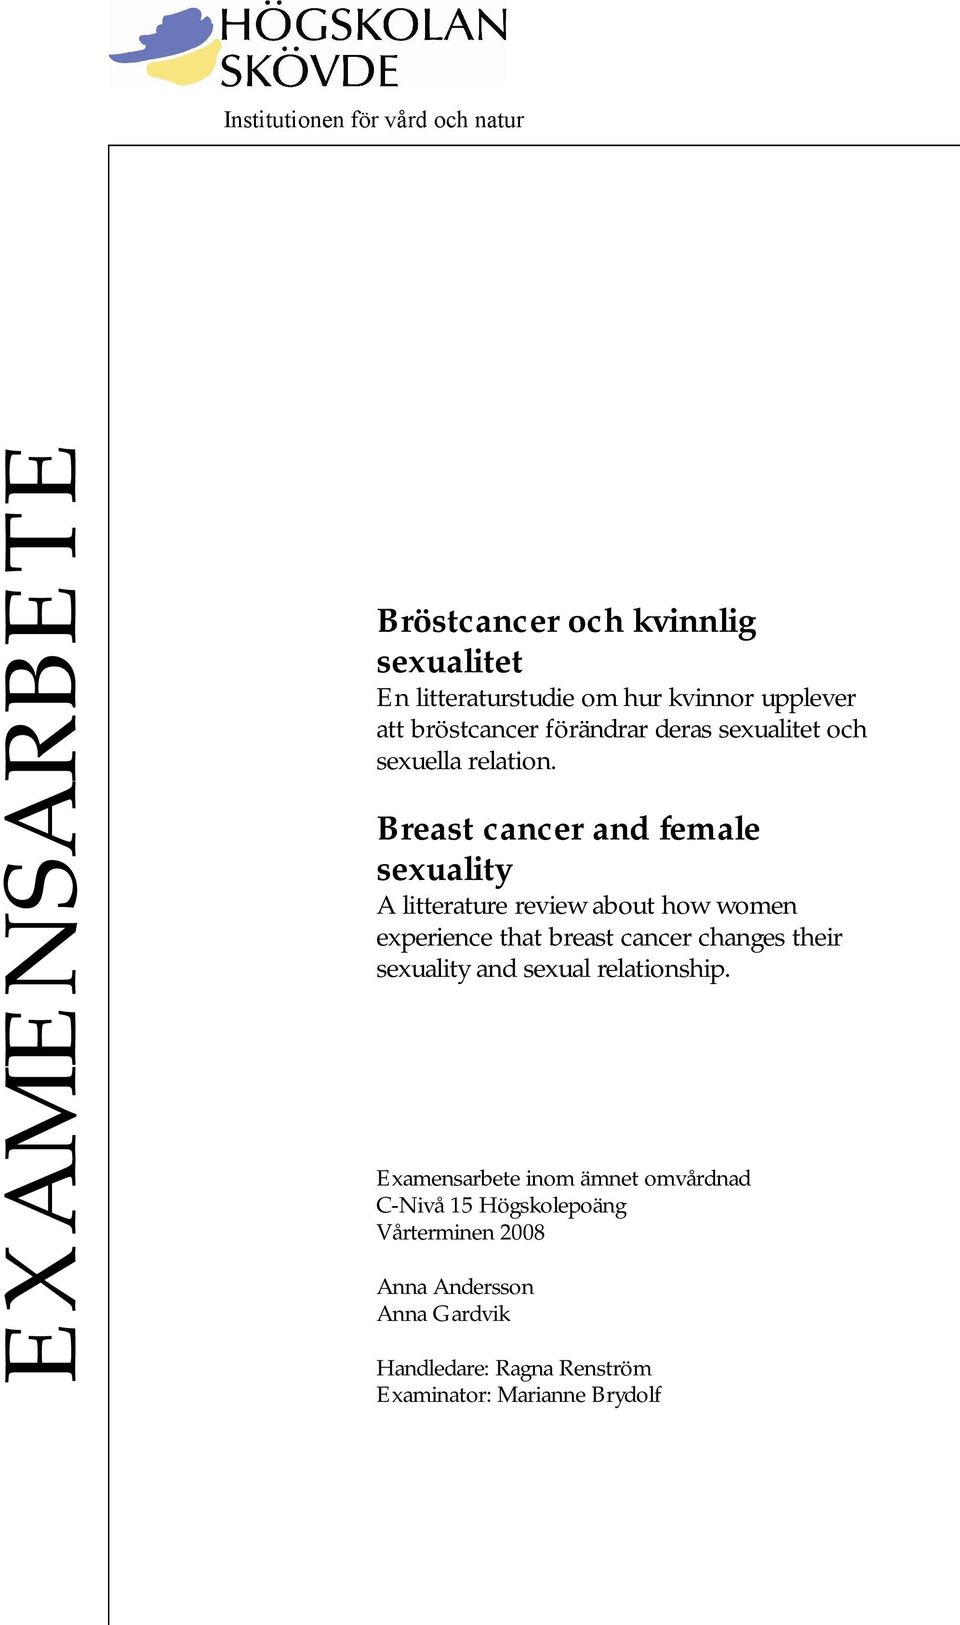 Breast cancer and female sexuality A litterature review about how women experience that breast cancer changes their sexuality